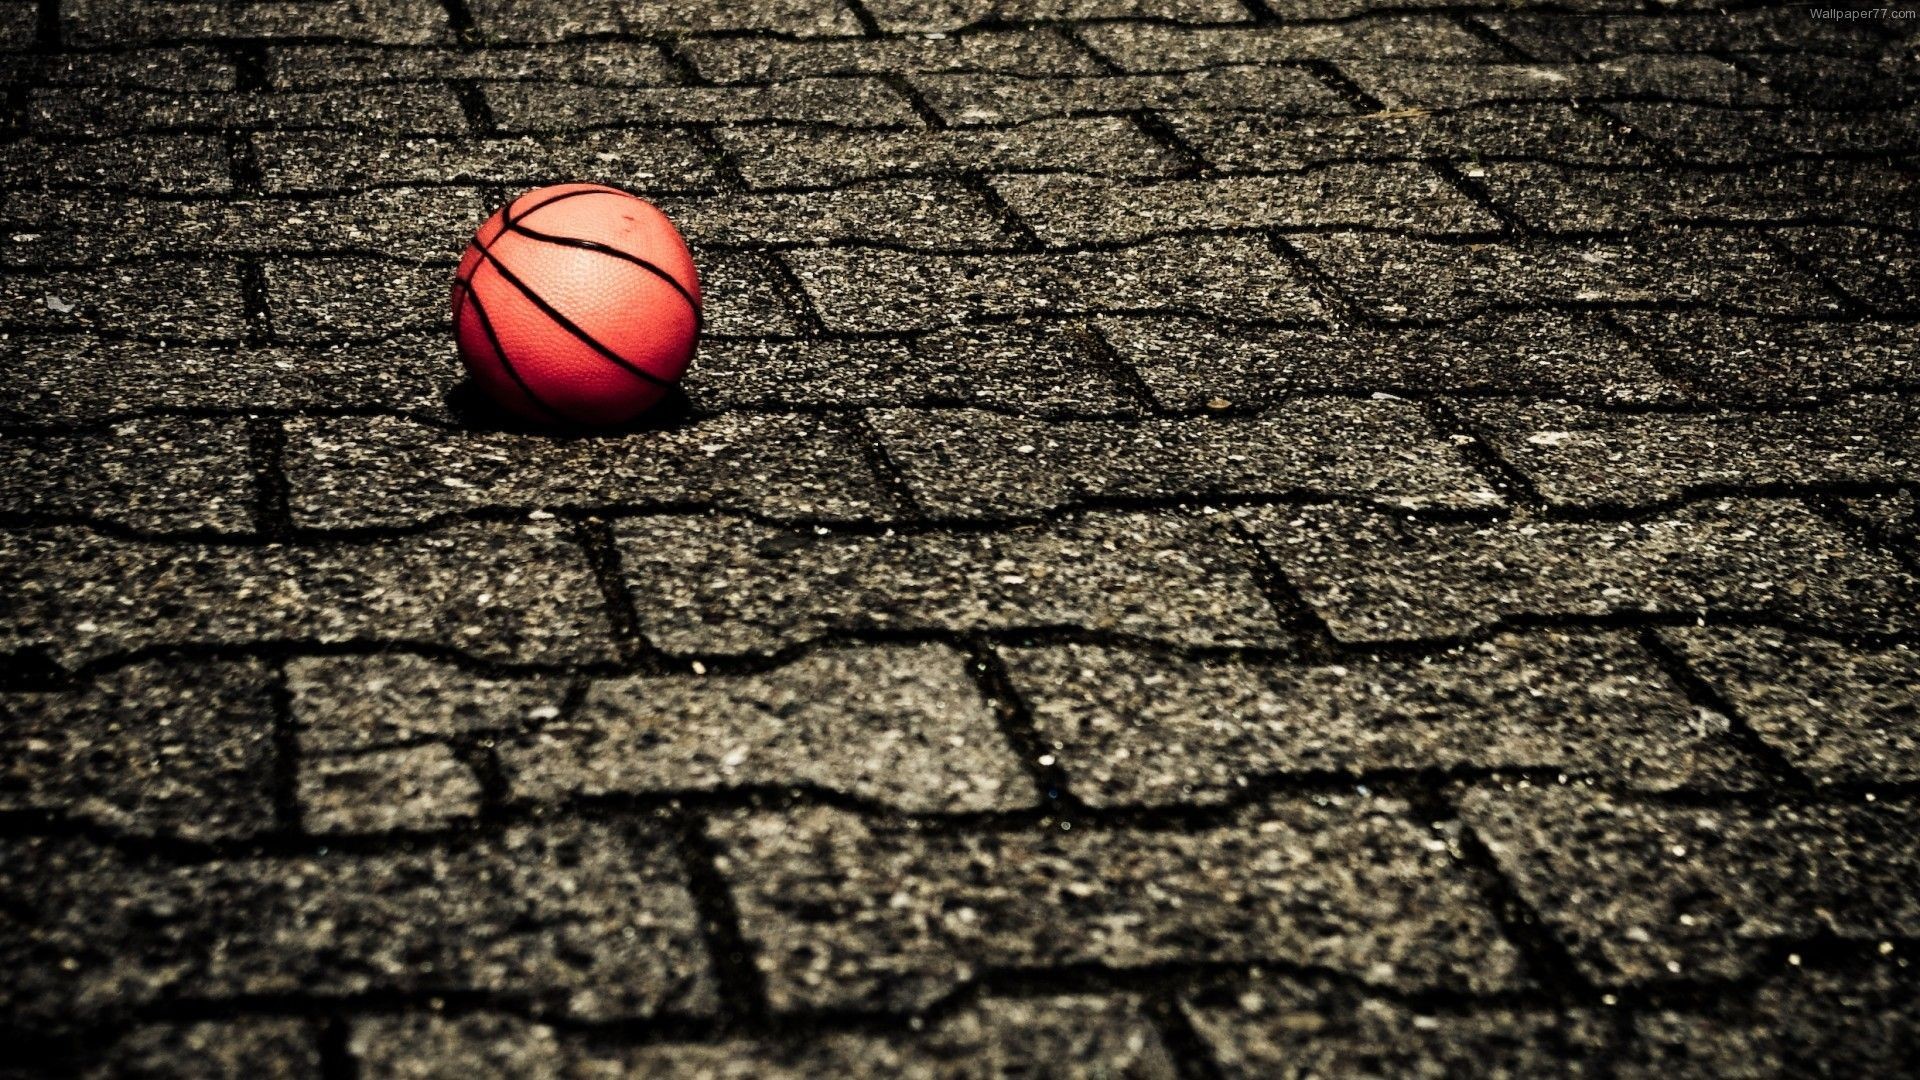 1920x1080 Awesome Basketball Wallpapers HD Free Download.